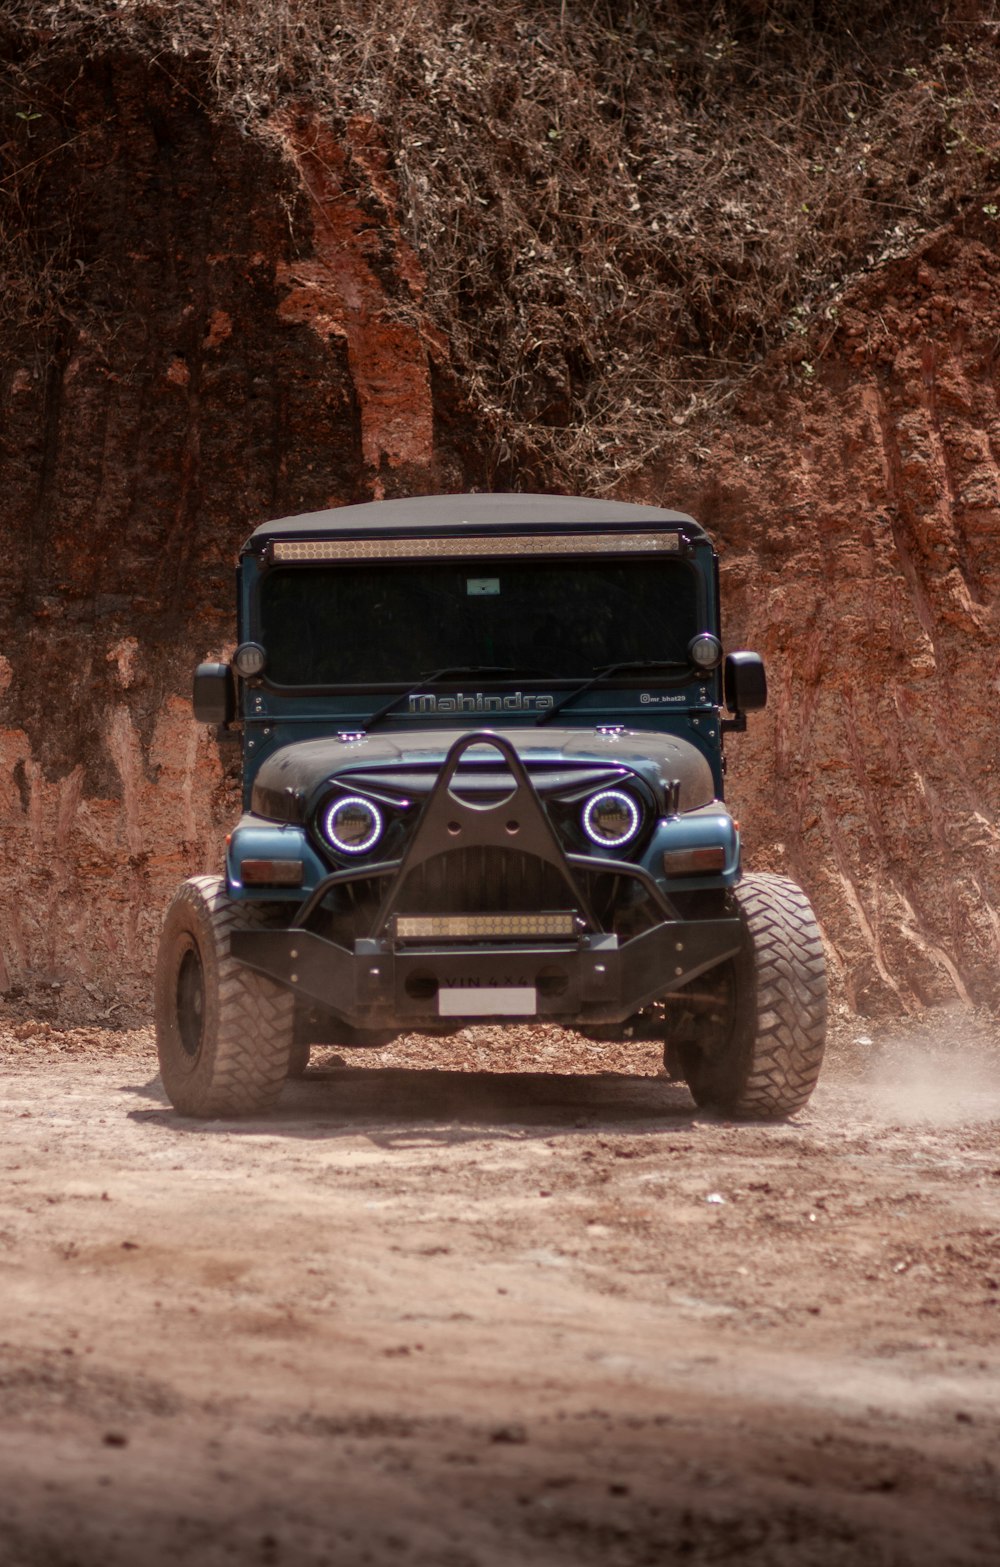 blue and black jeep wrangler on dirt road during daytime